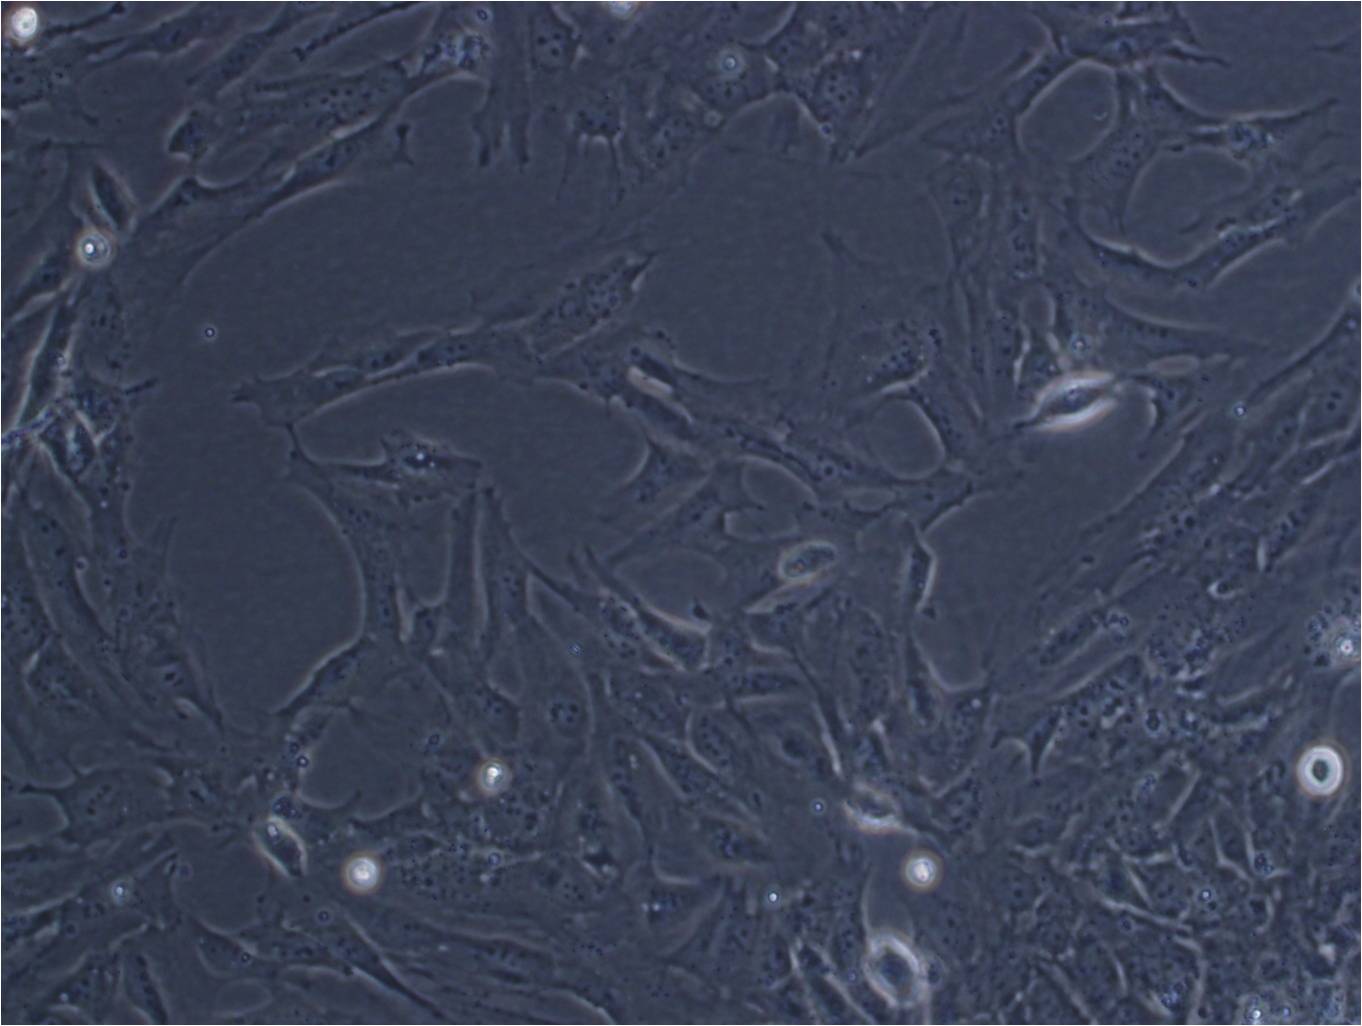 LC-2/ad epithelioid cells人肺癌腺癌细胞系